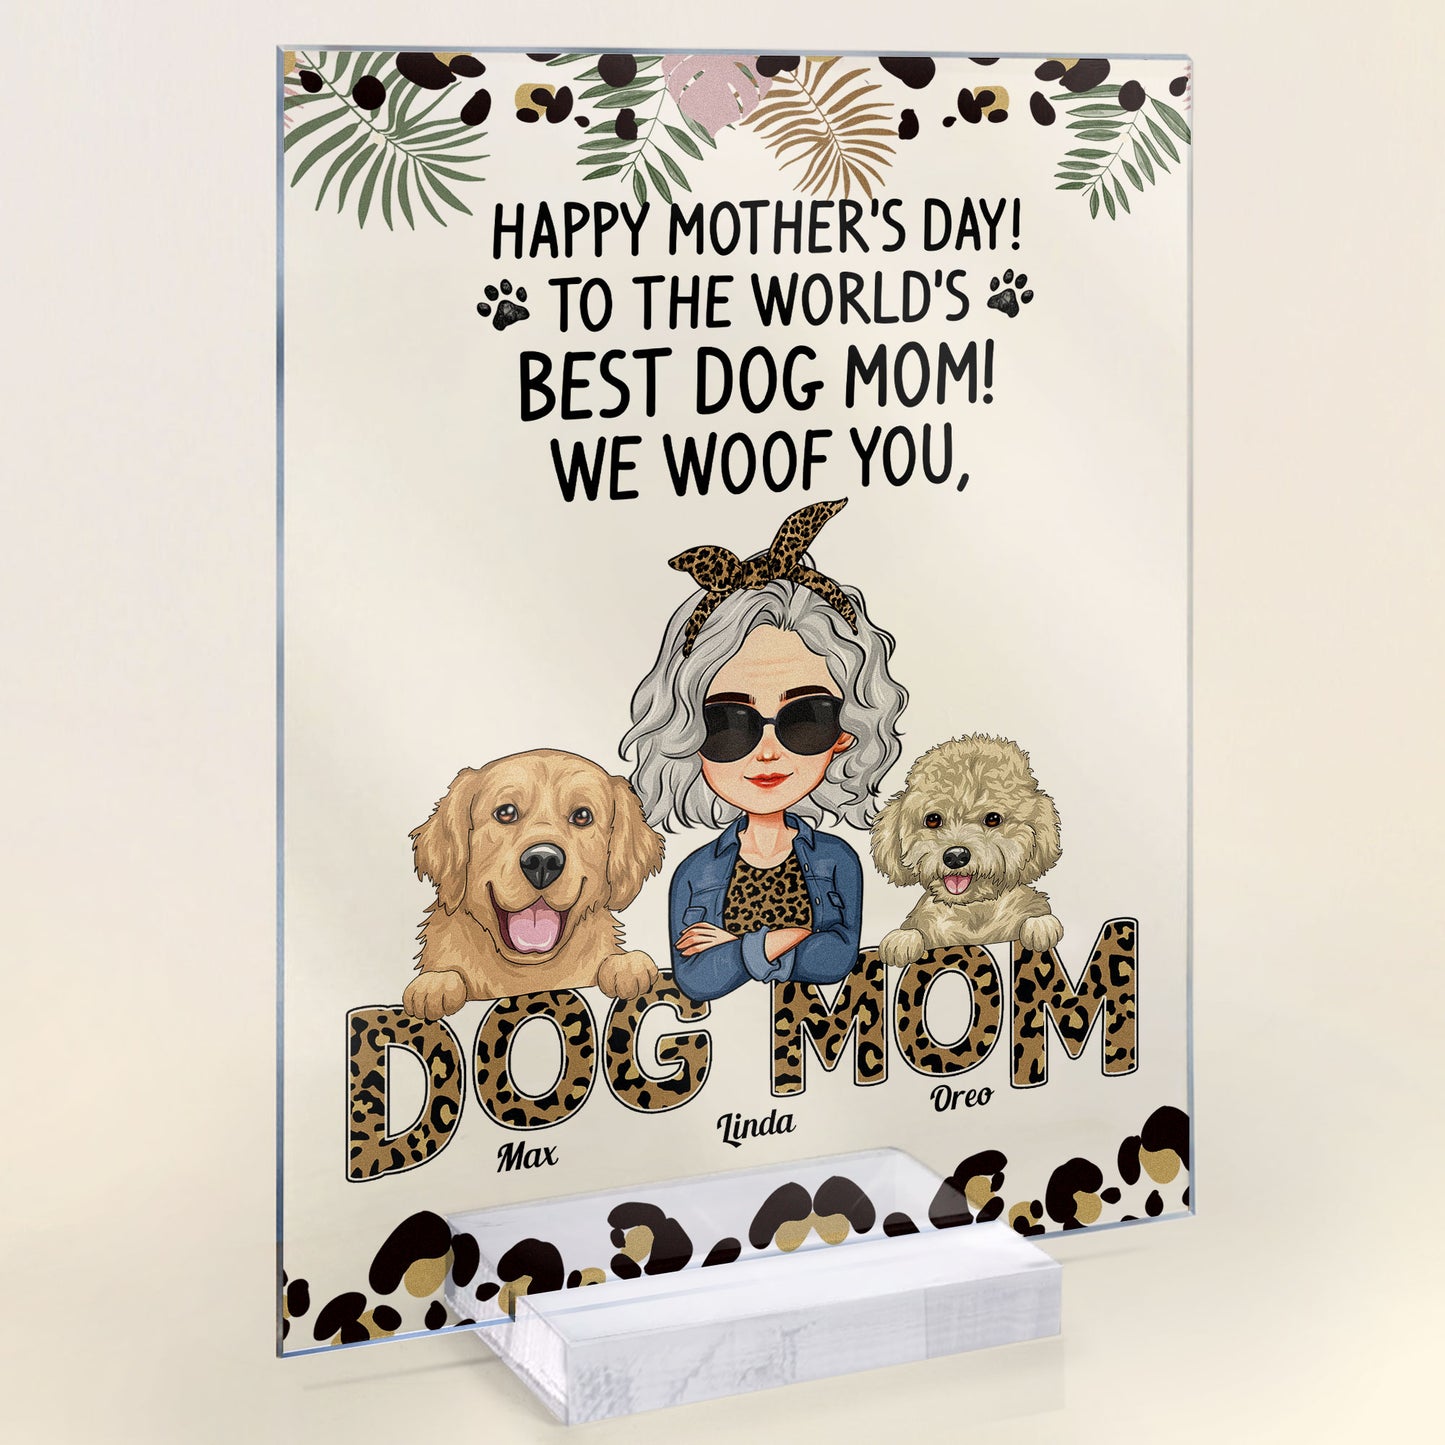 Happy Mother's Day We Woof You - Personalized Acrylic Plaque